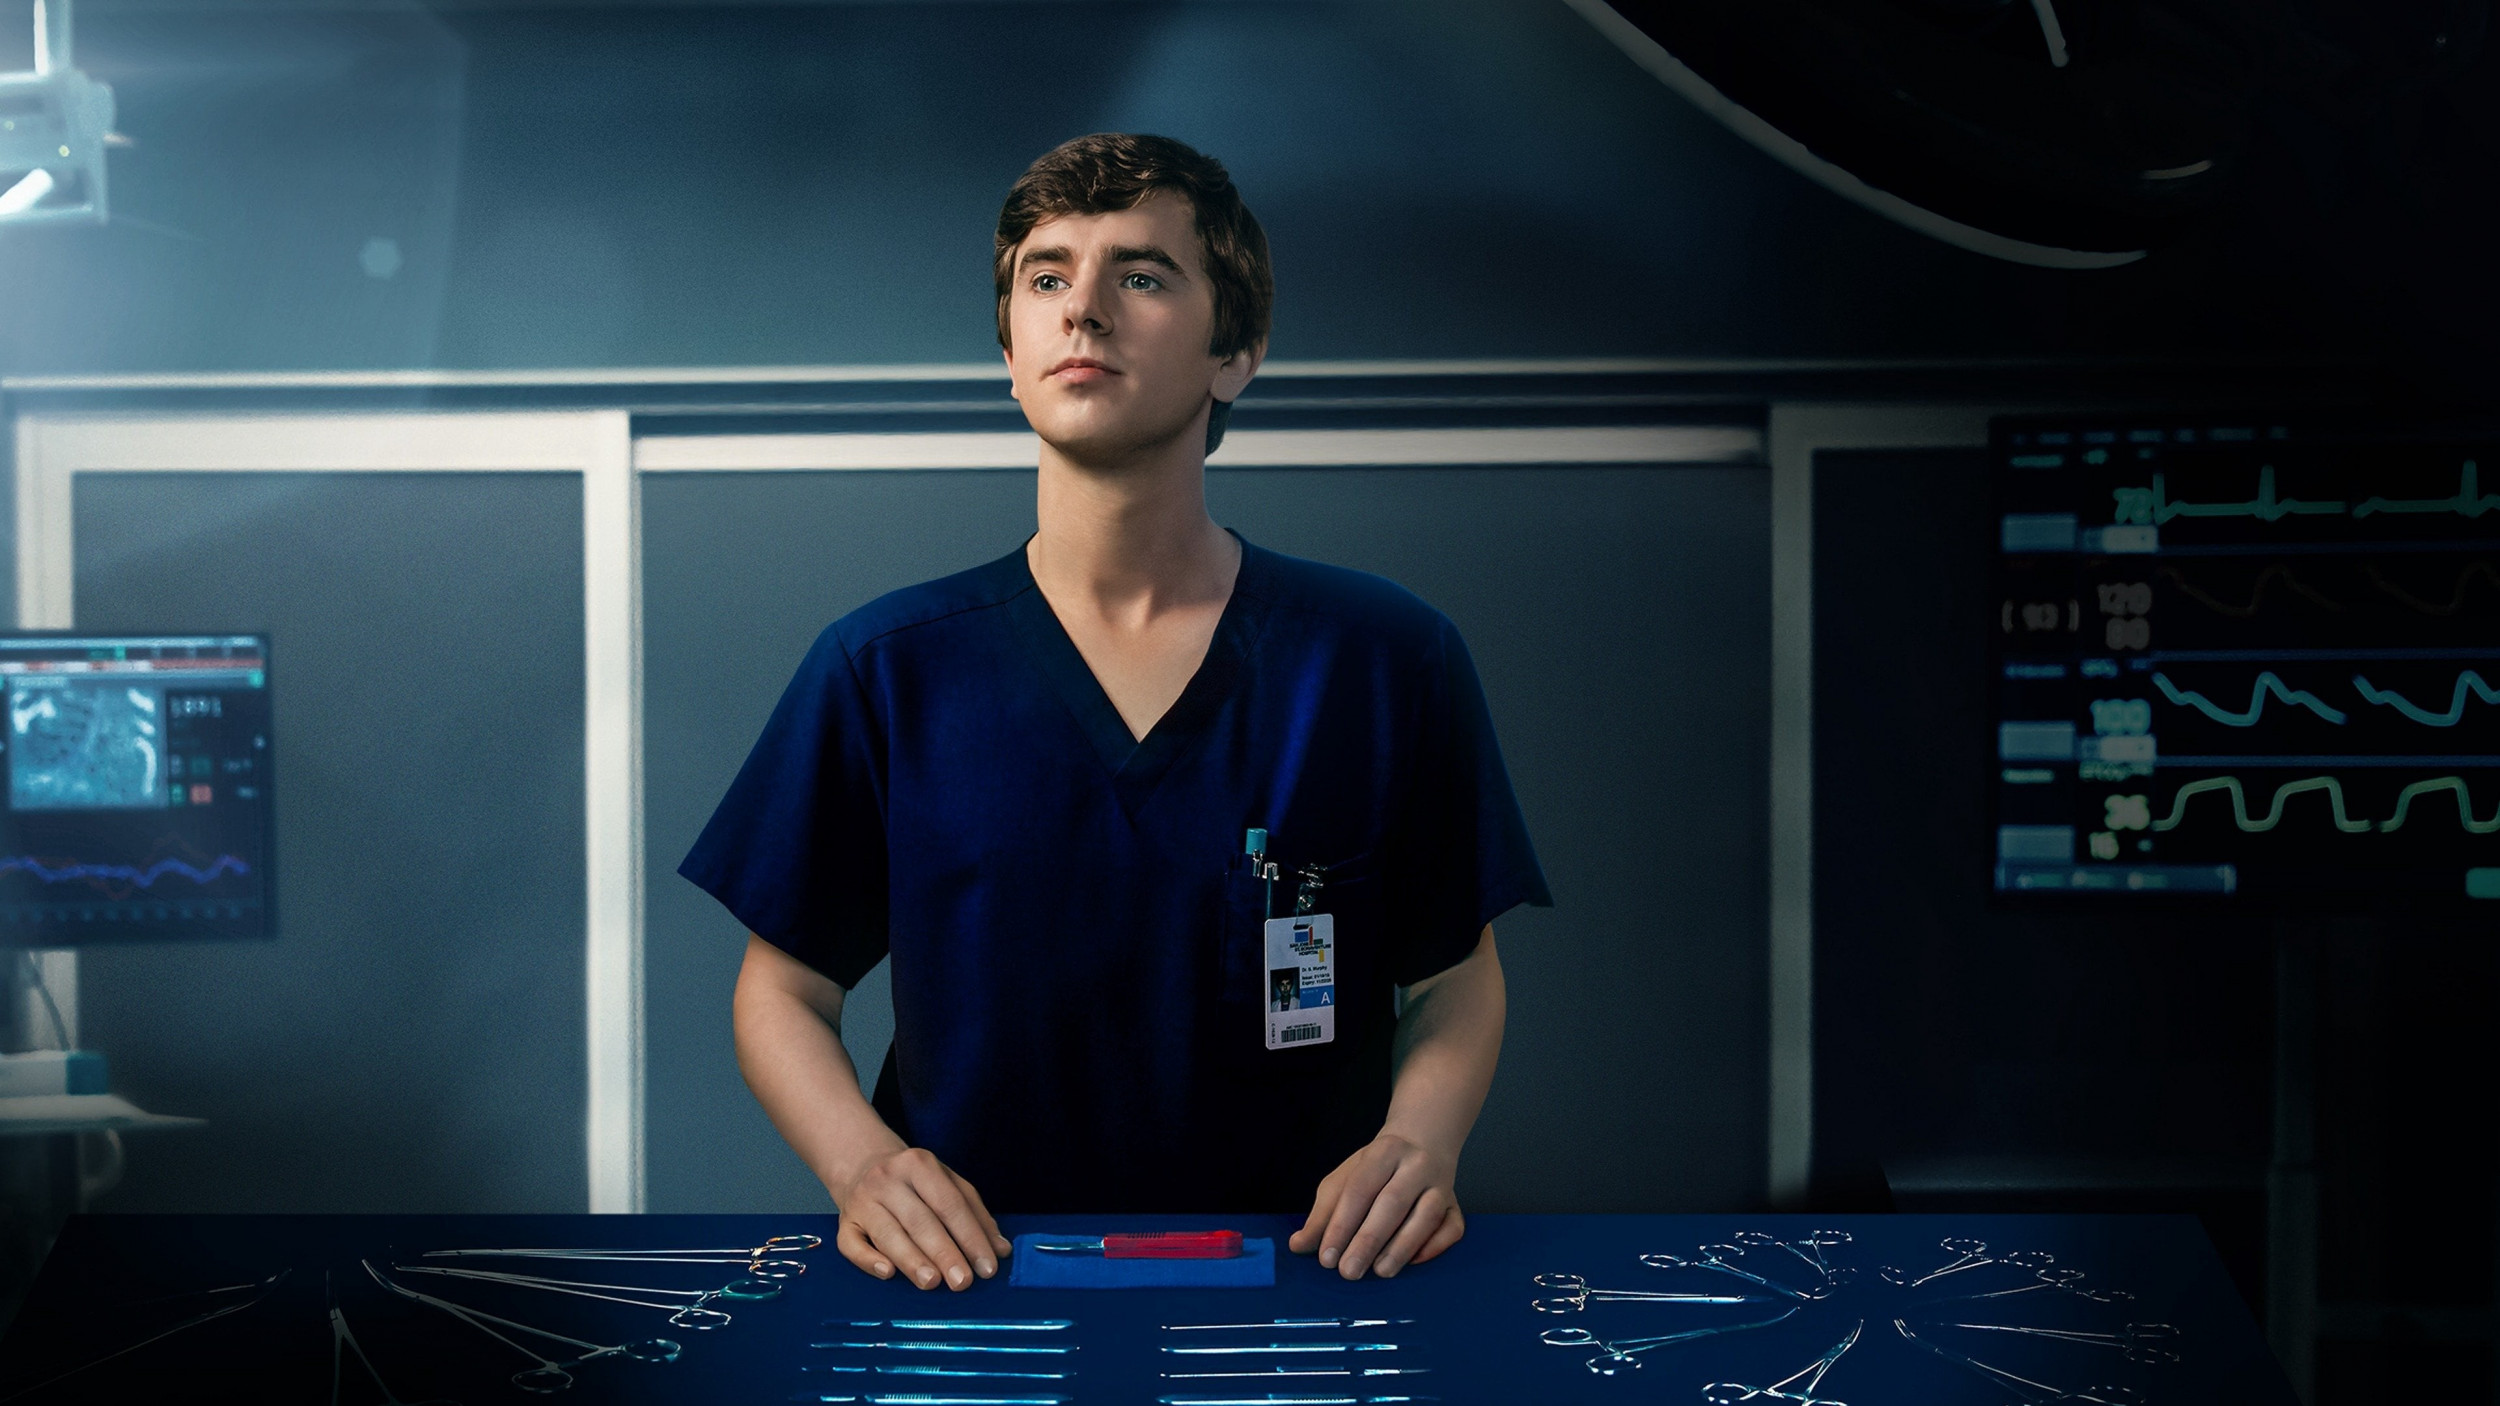 The Good Doctor Season 4 Episode 1 Review: Frontline Part 